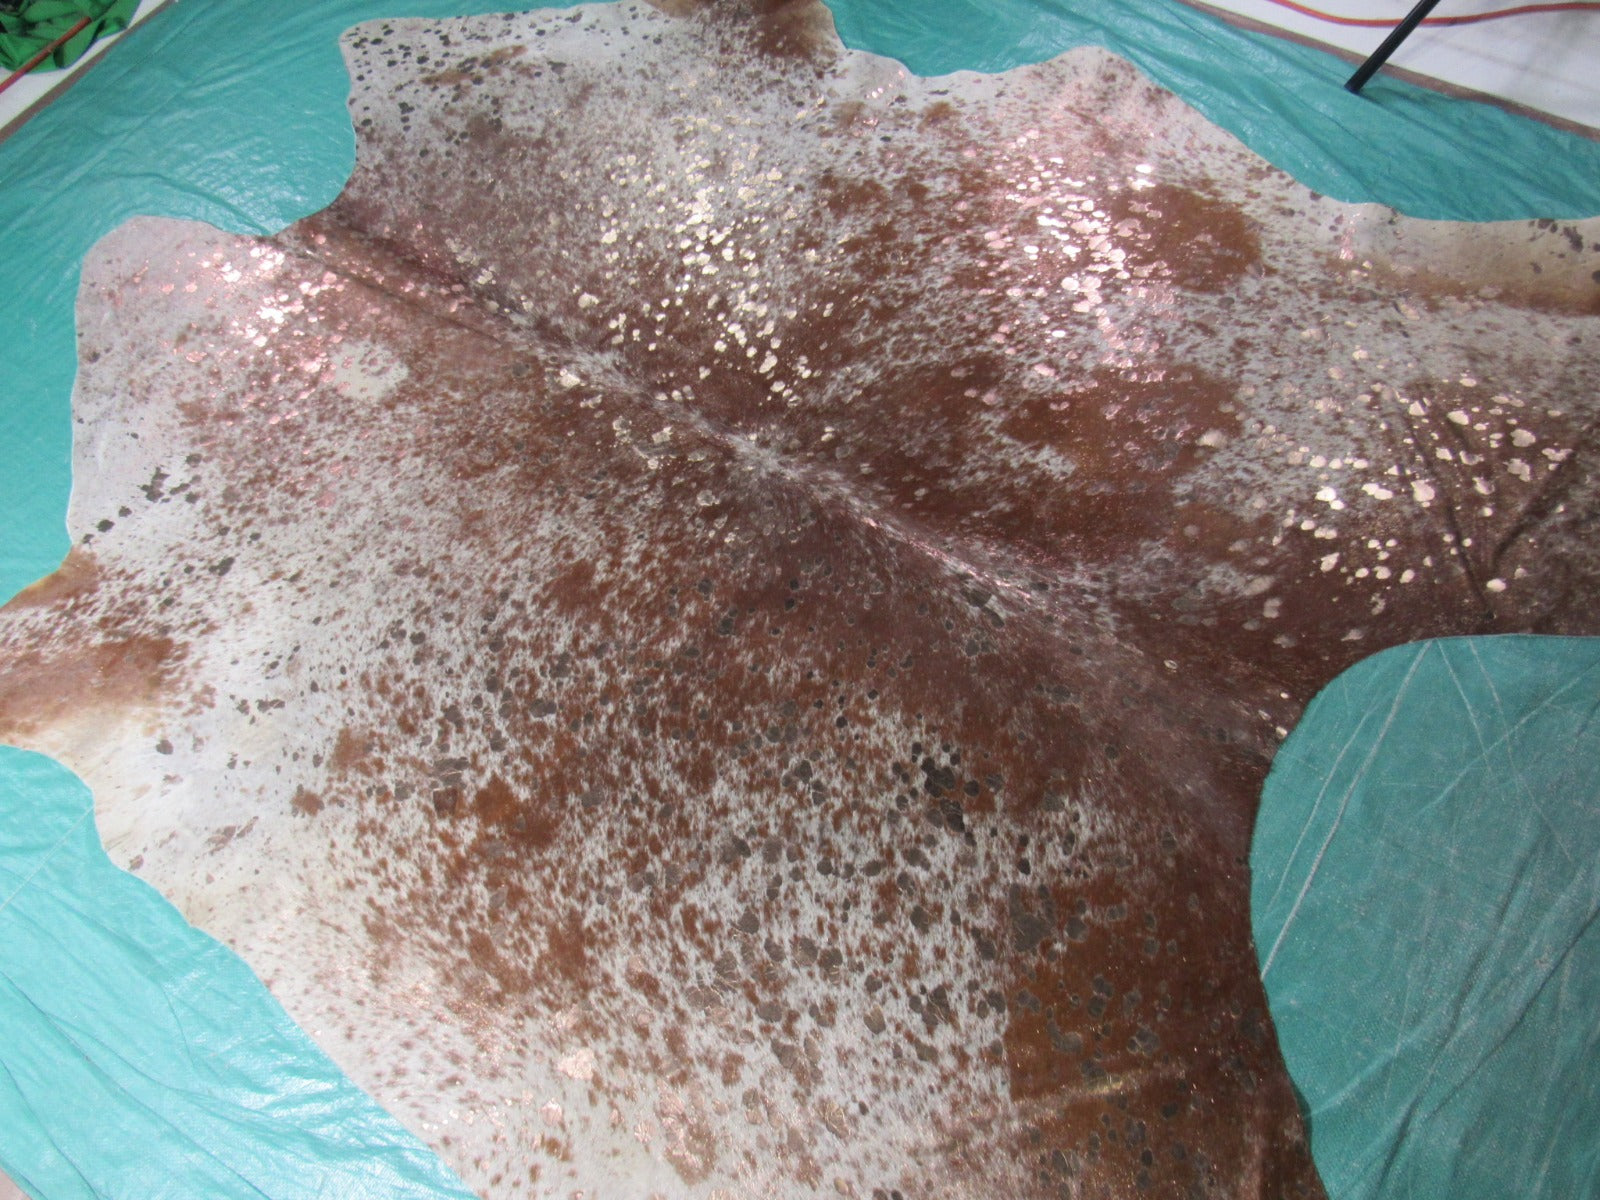 Brown & White Speckled with Rose Gold Cowhide Rug - Size: 7 1/2x6 1/4 feet C-1587